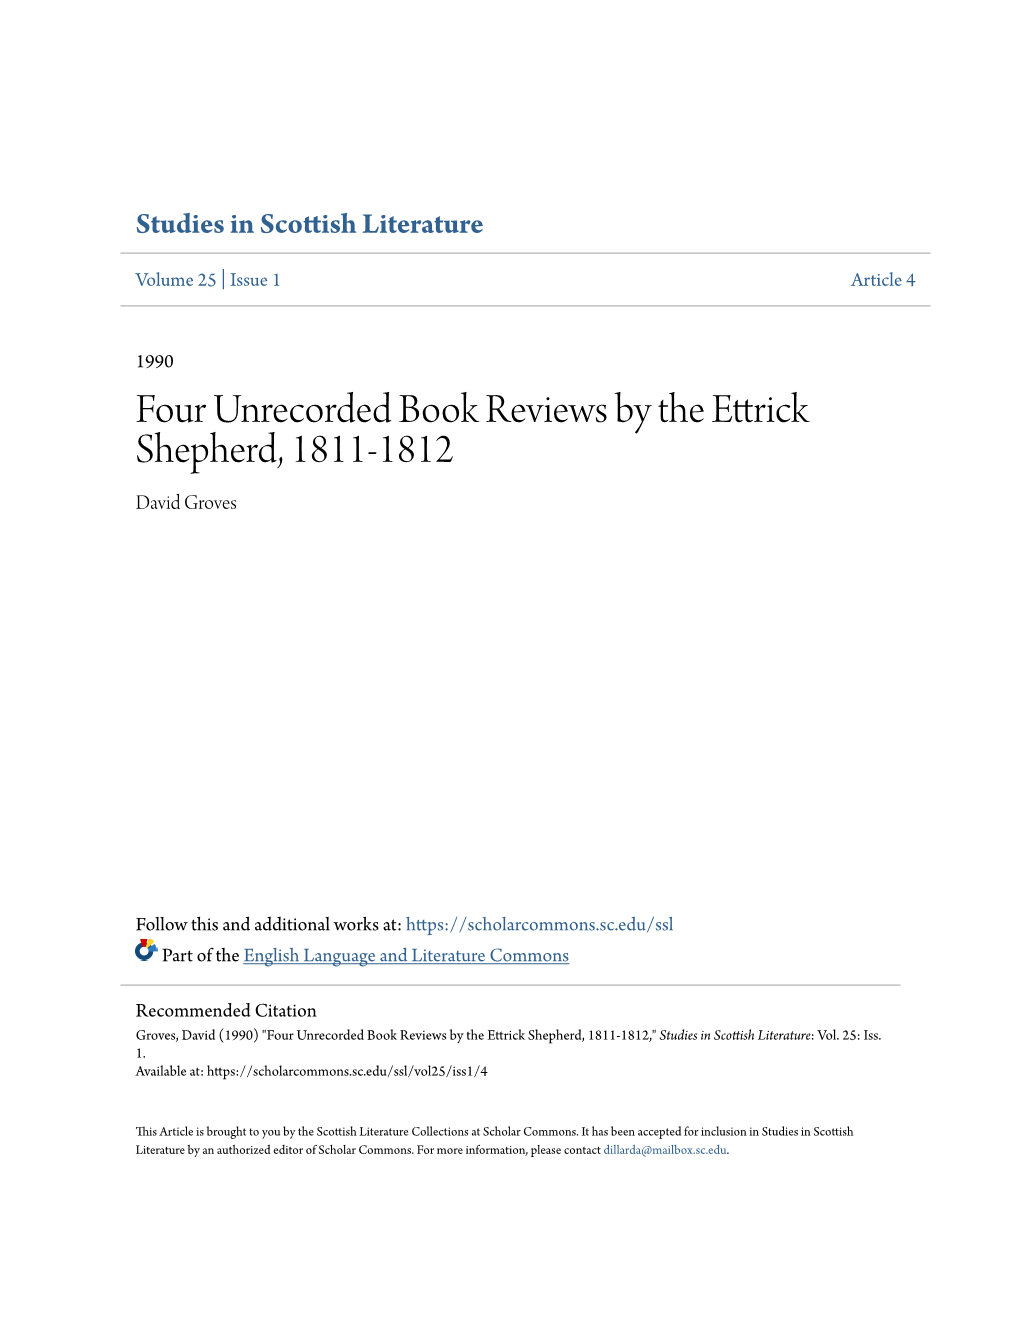 Four Unrecorded Book Reviews by the Ettrick Shepherd, 1811-1812 David Groves